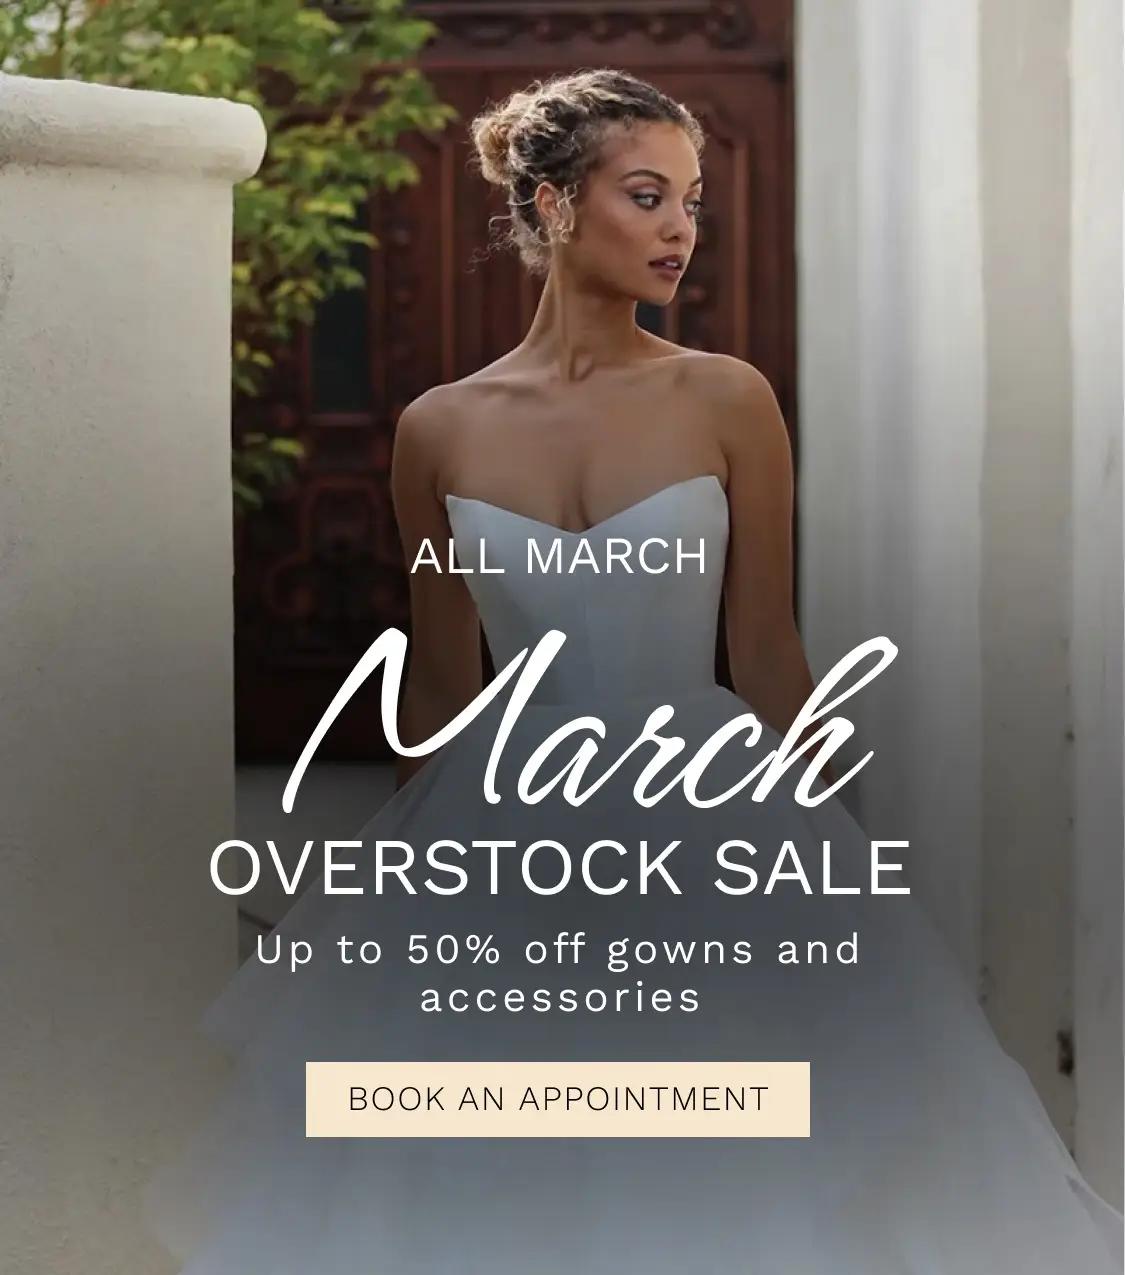 March Overstock Sale Banner for Mobile